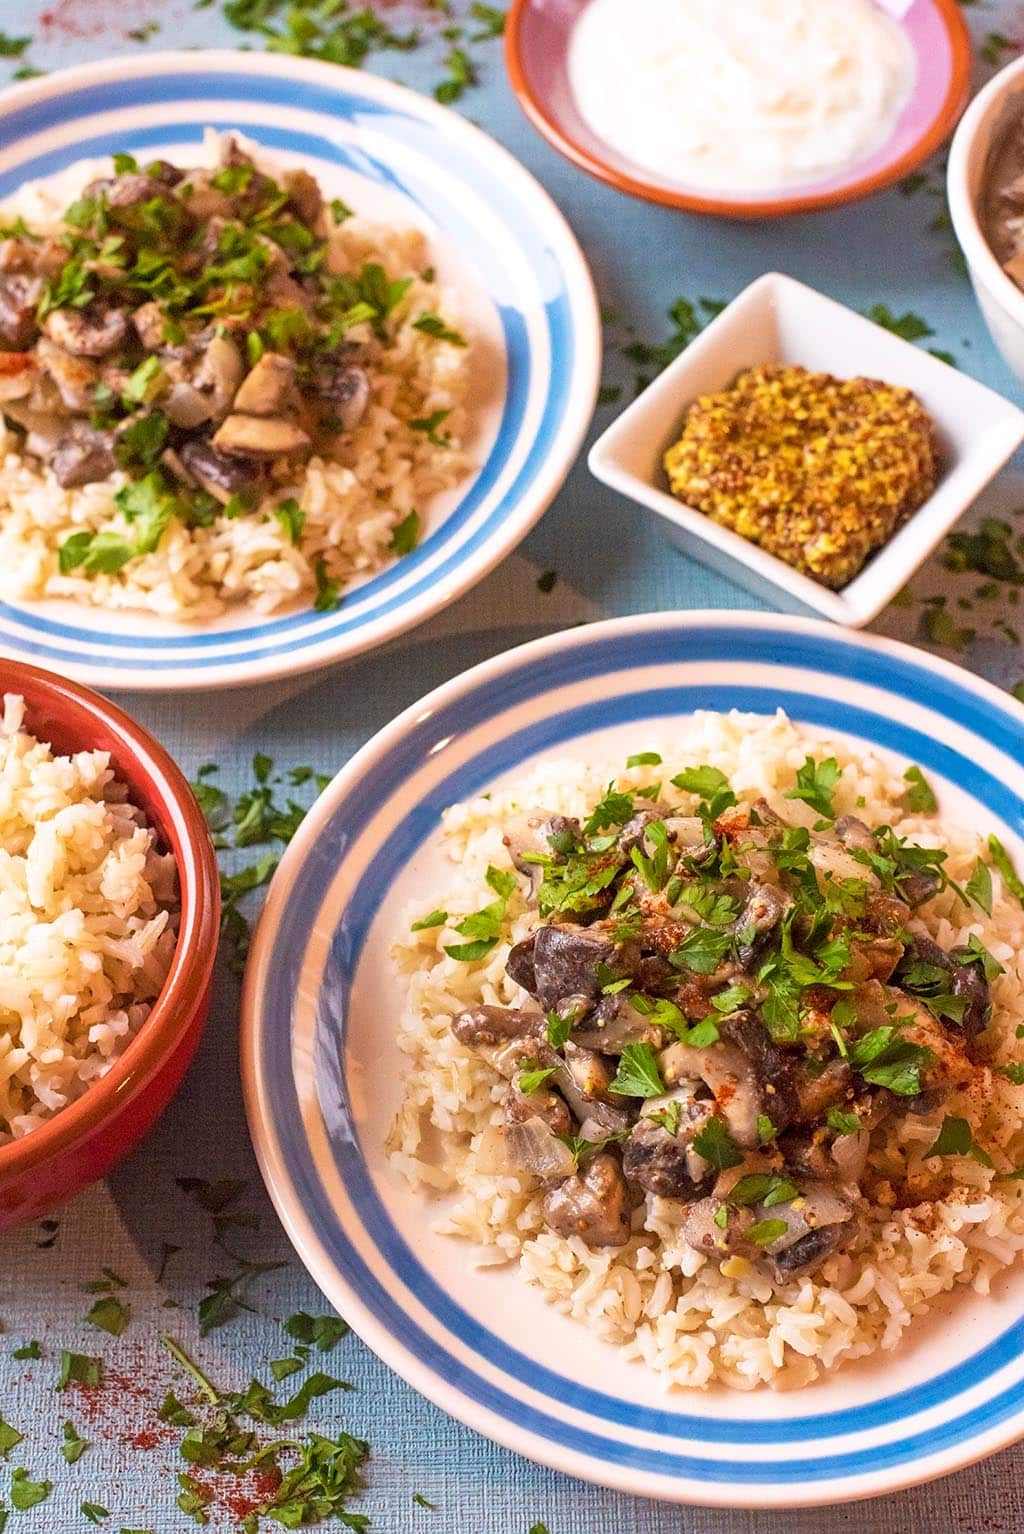 Mushroom Stroganoff served on two blue and white plates surrounded dishes of cream, mustard and rice.